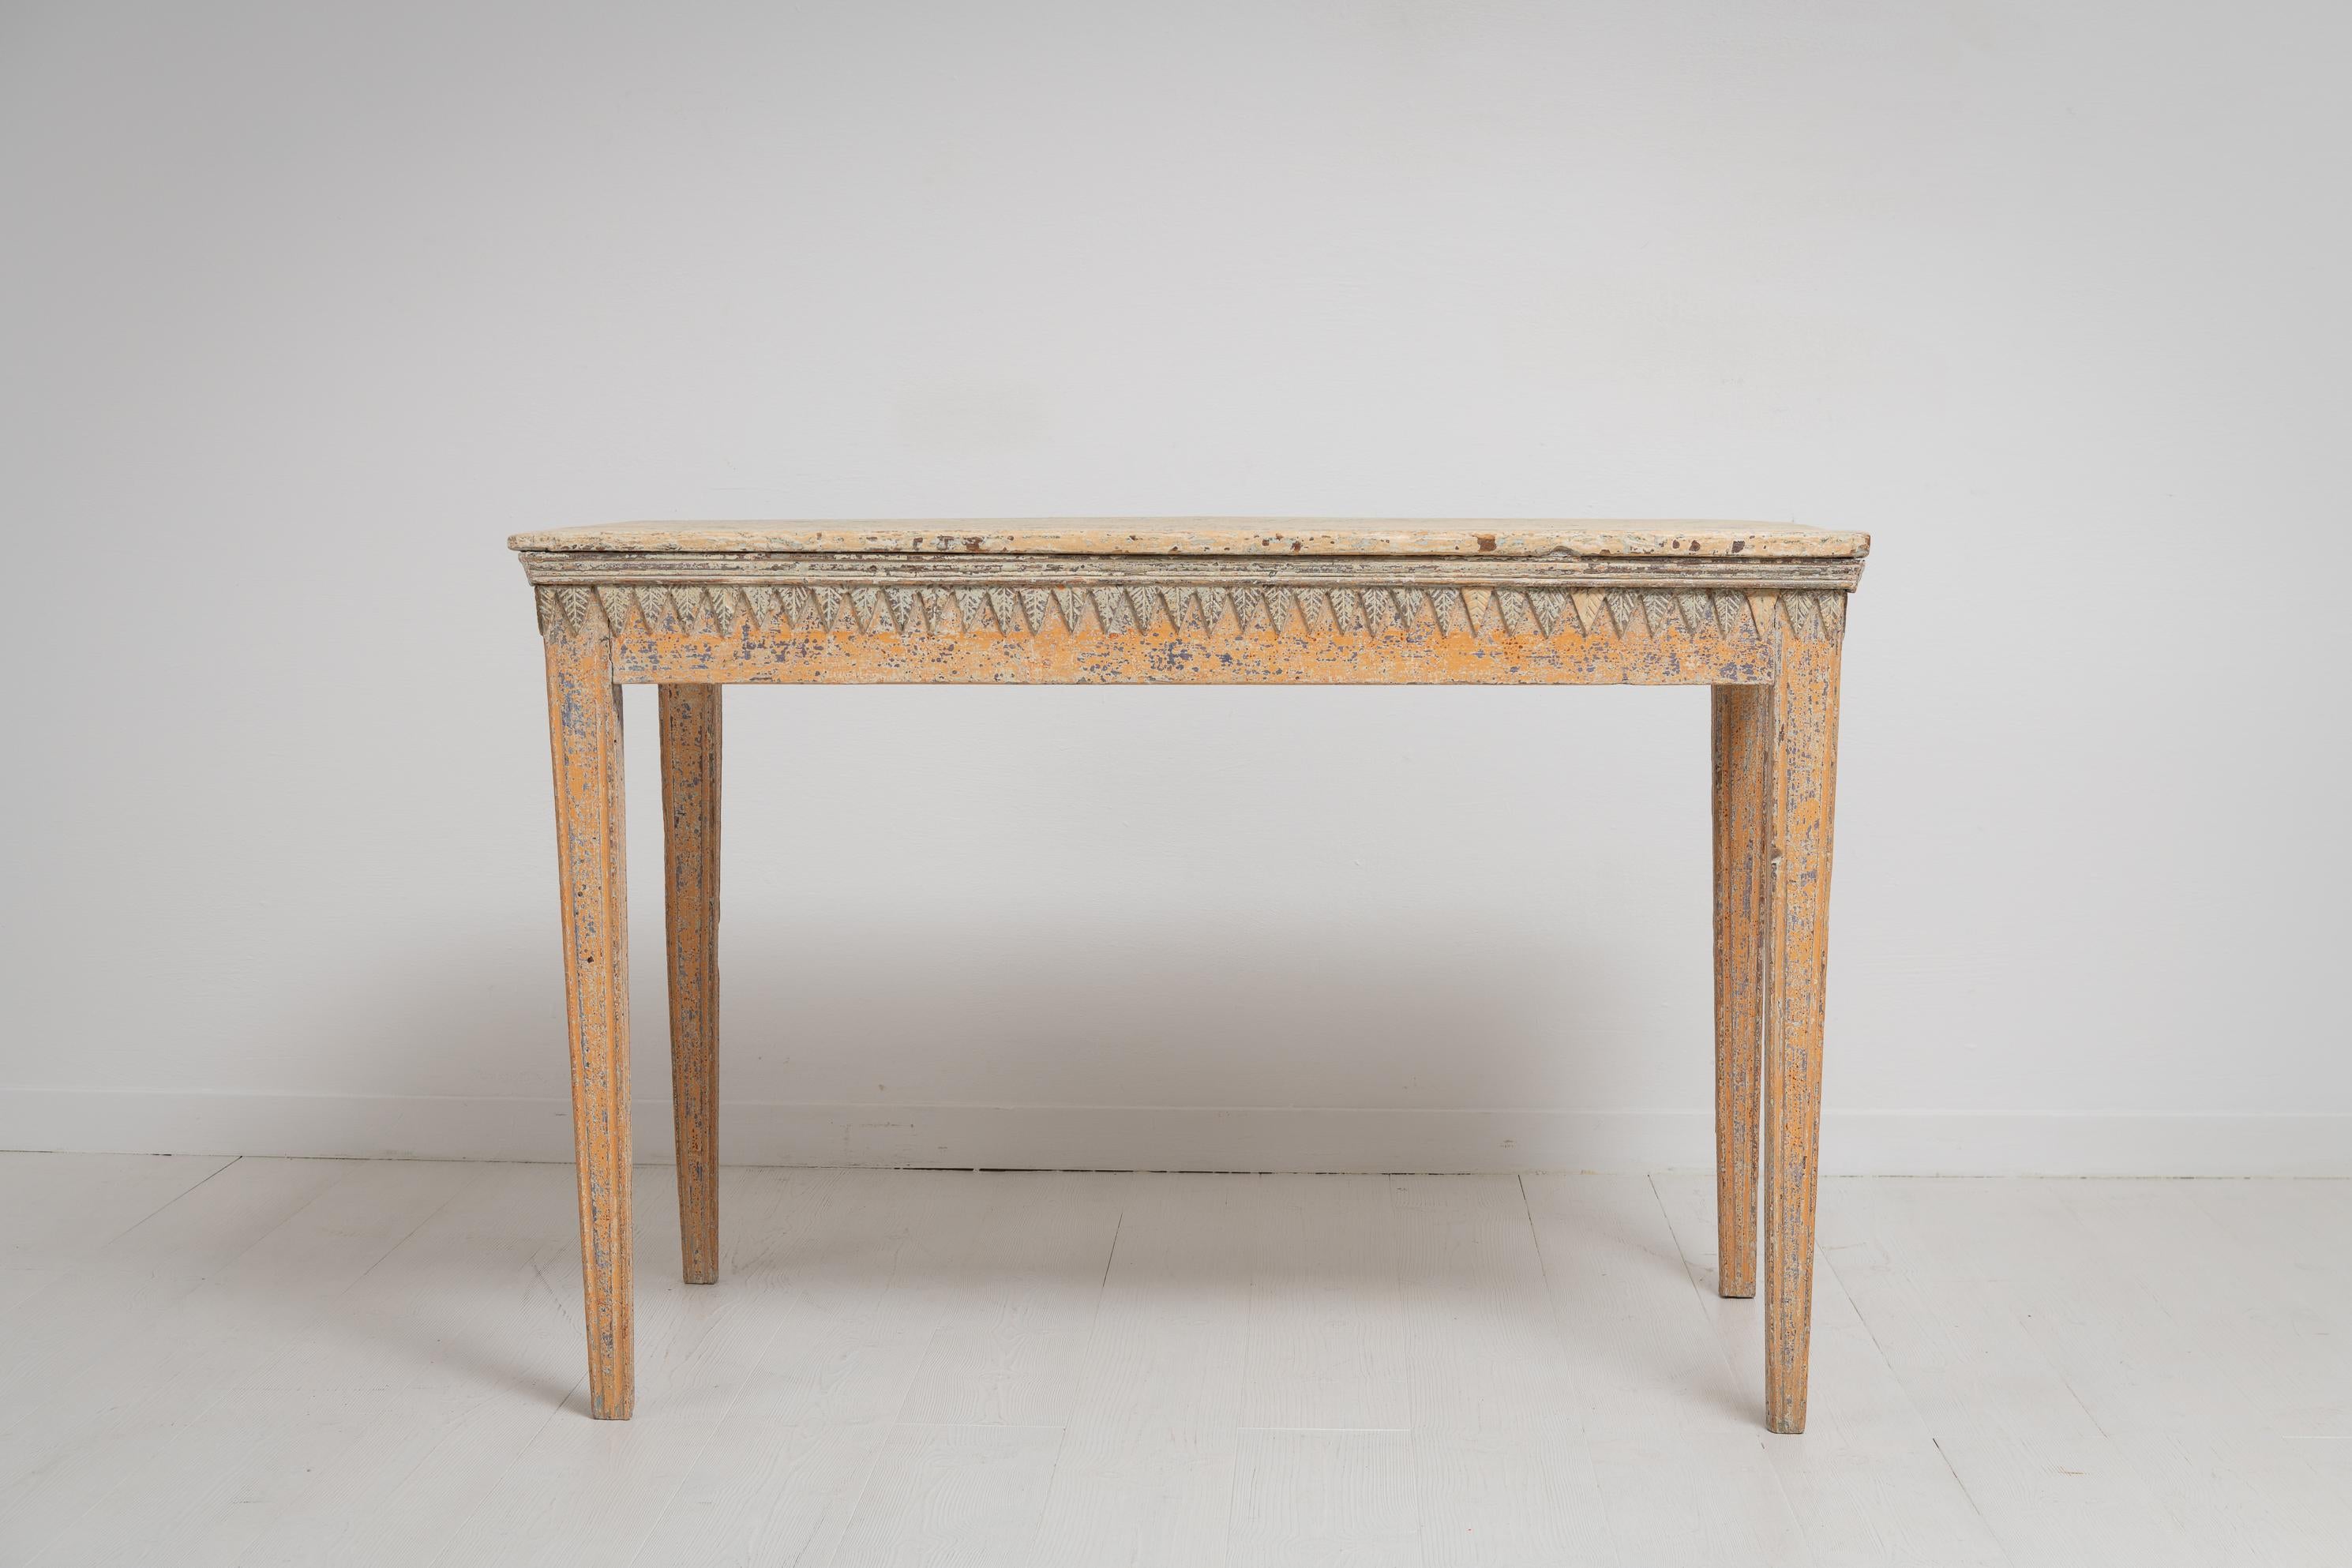 Rare Swedish gustavian country side table form Northern Sweden, made around 1780 to 1790. The table is made in pine and has the original first paint from the late 1700s. The paint was brought forward by dry scraping it by hand to remove later paint